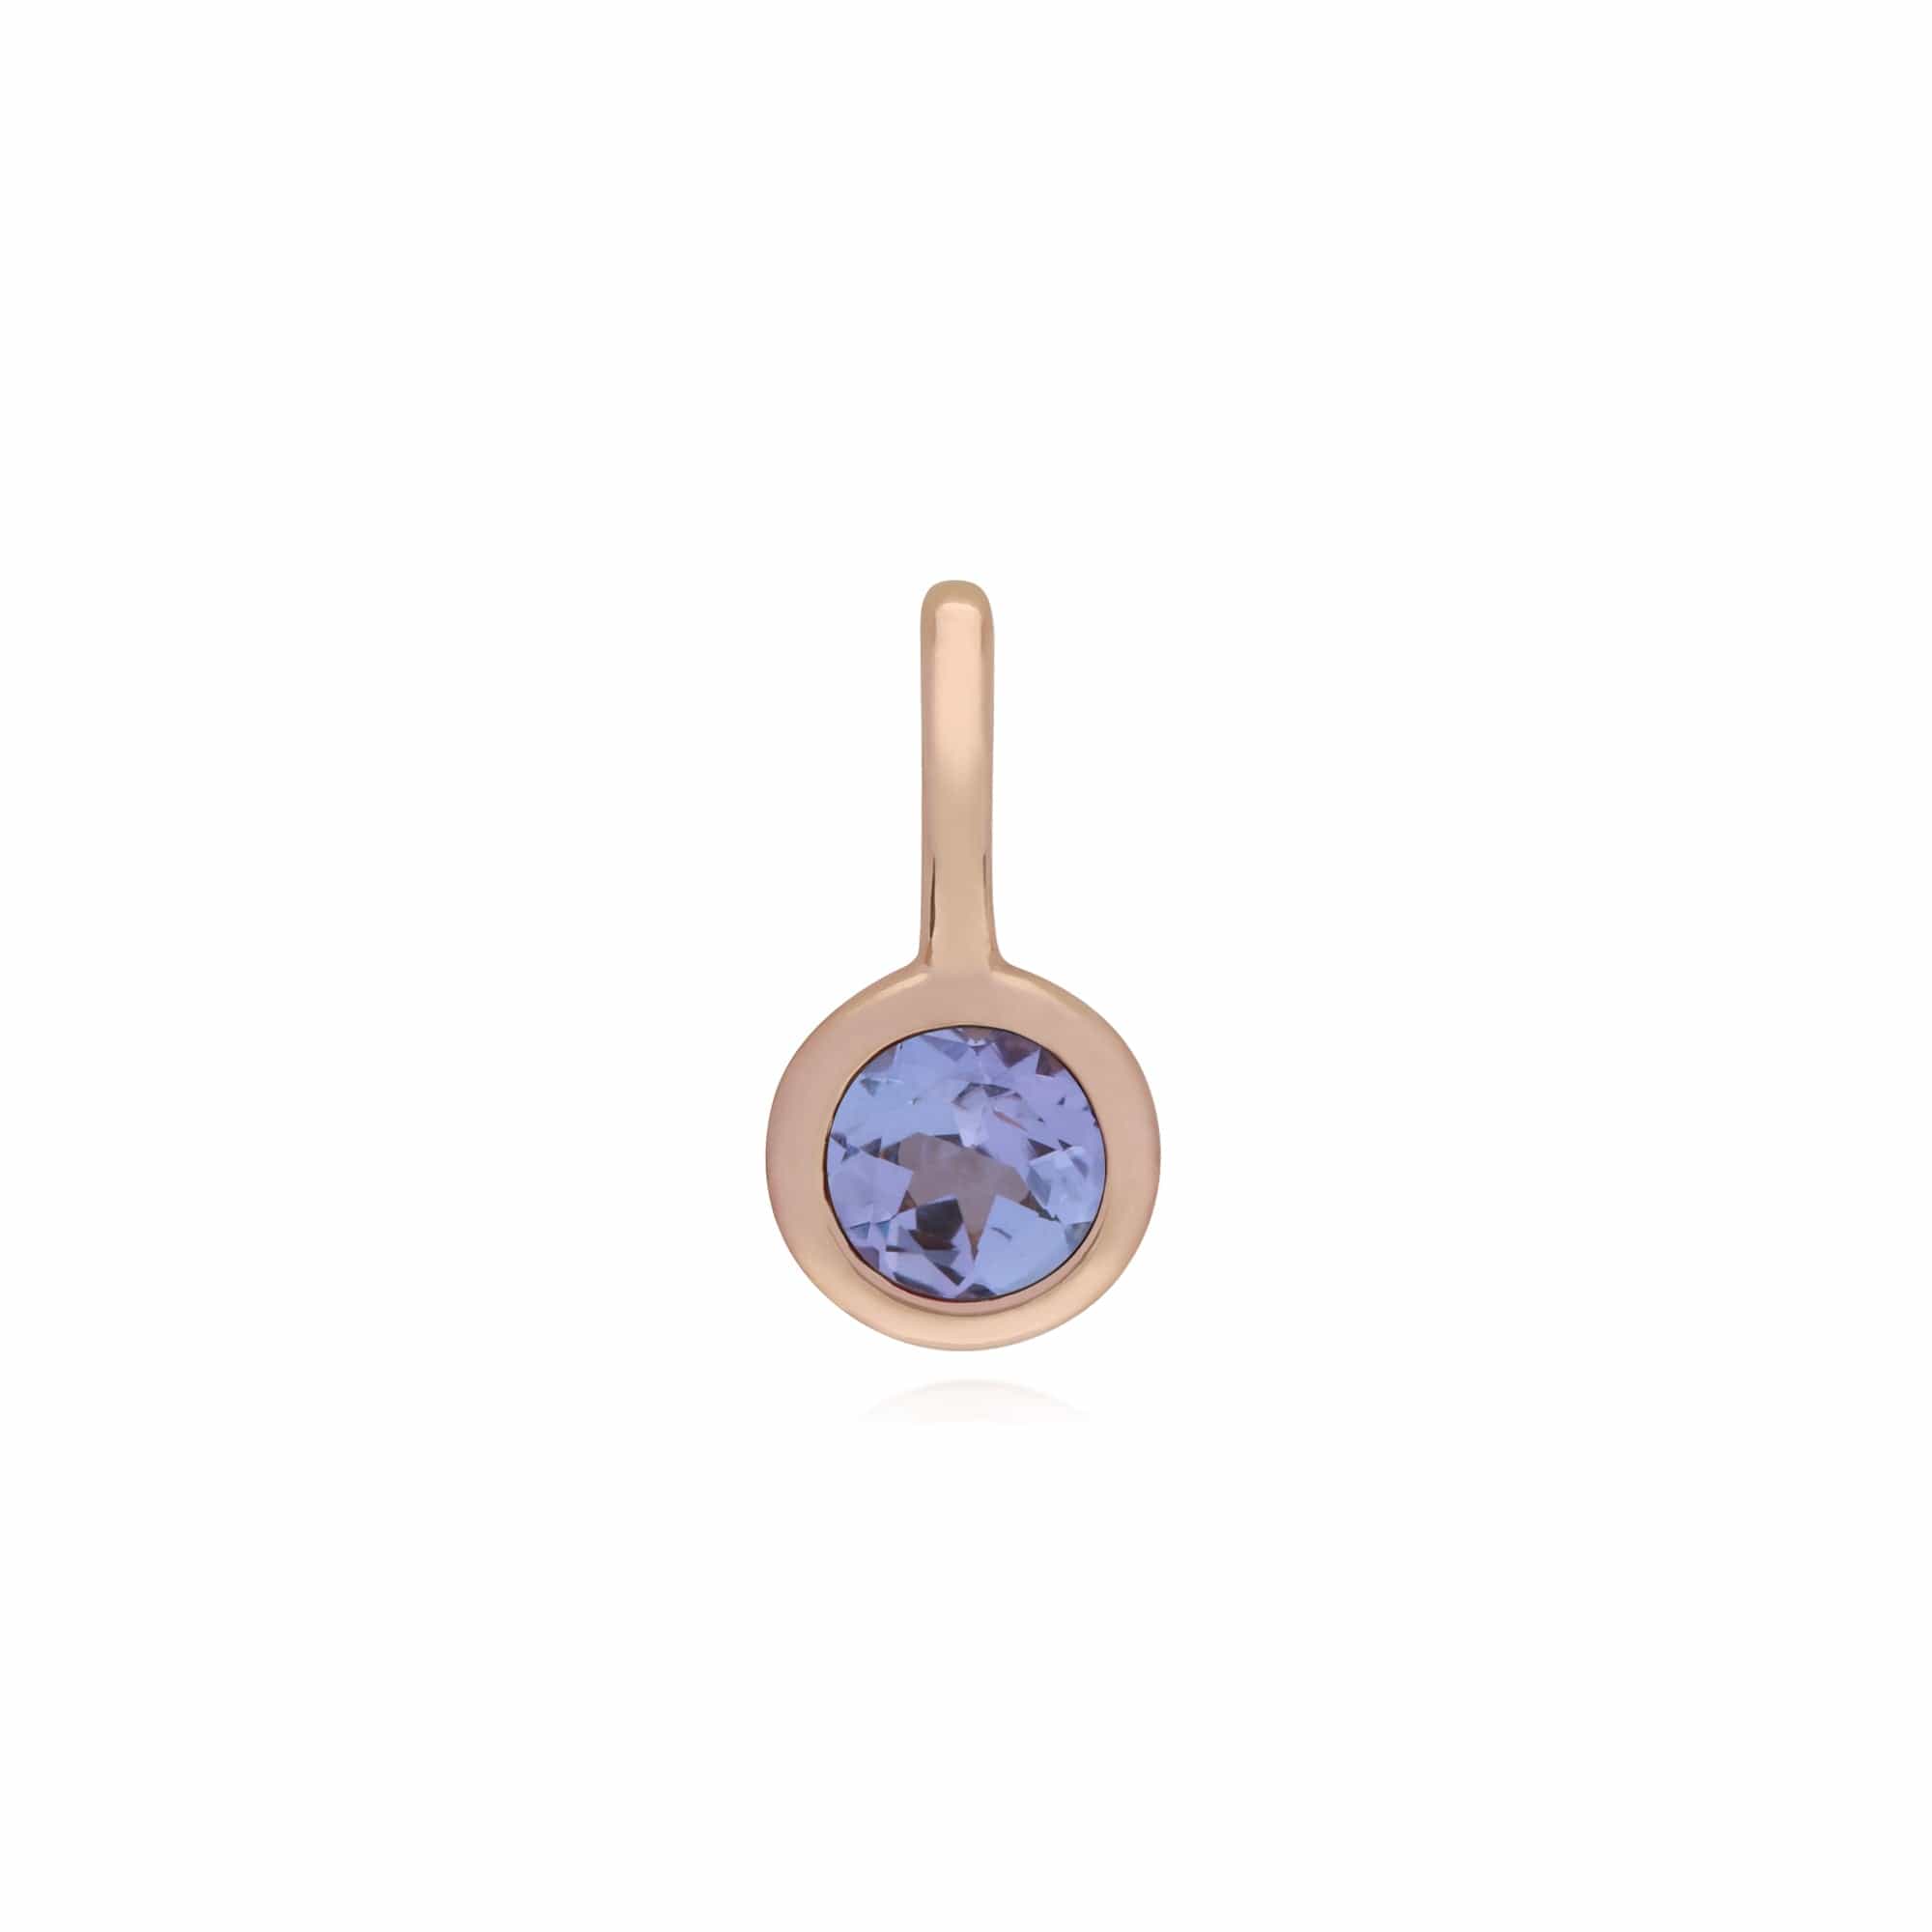 270P027306925-270P026901925 Classic Heart Lock Pendant & Tanzanite Charm in Rose Gold Plated 925 Sterling Silver 2